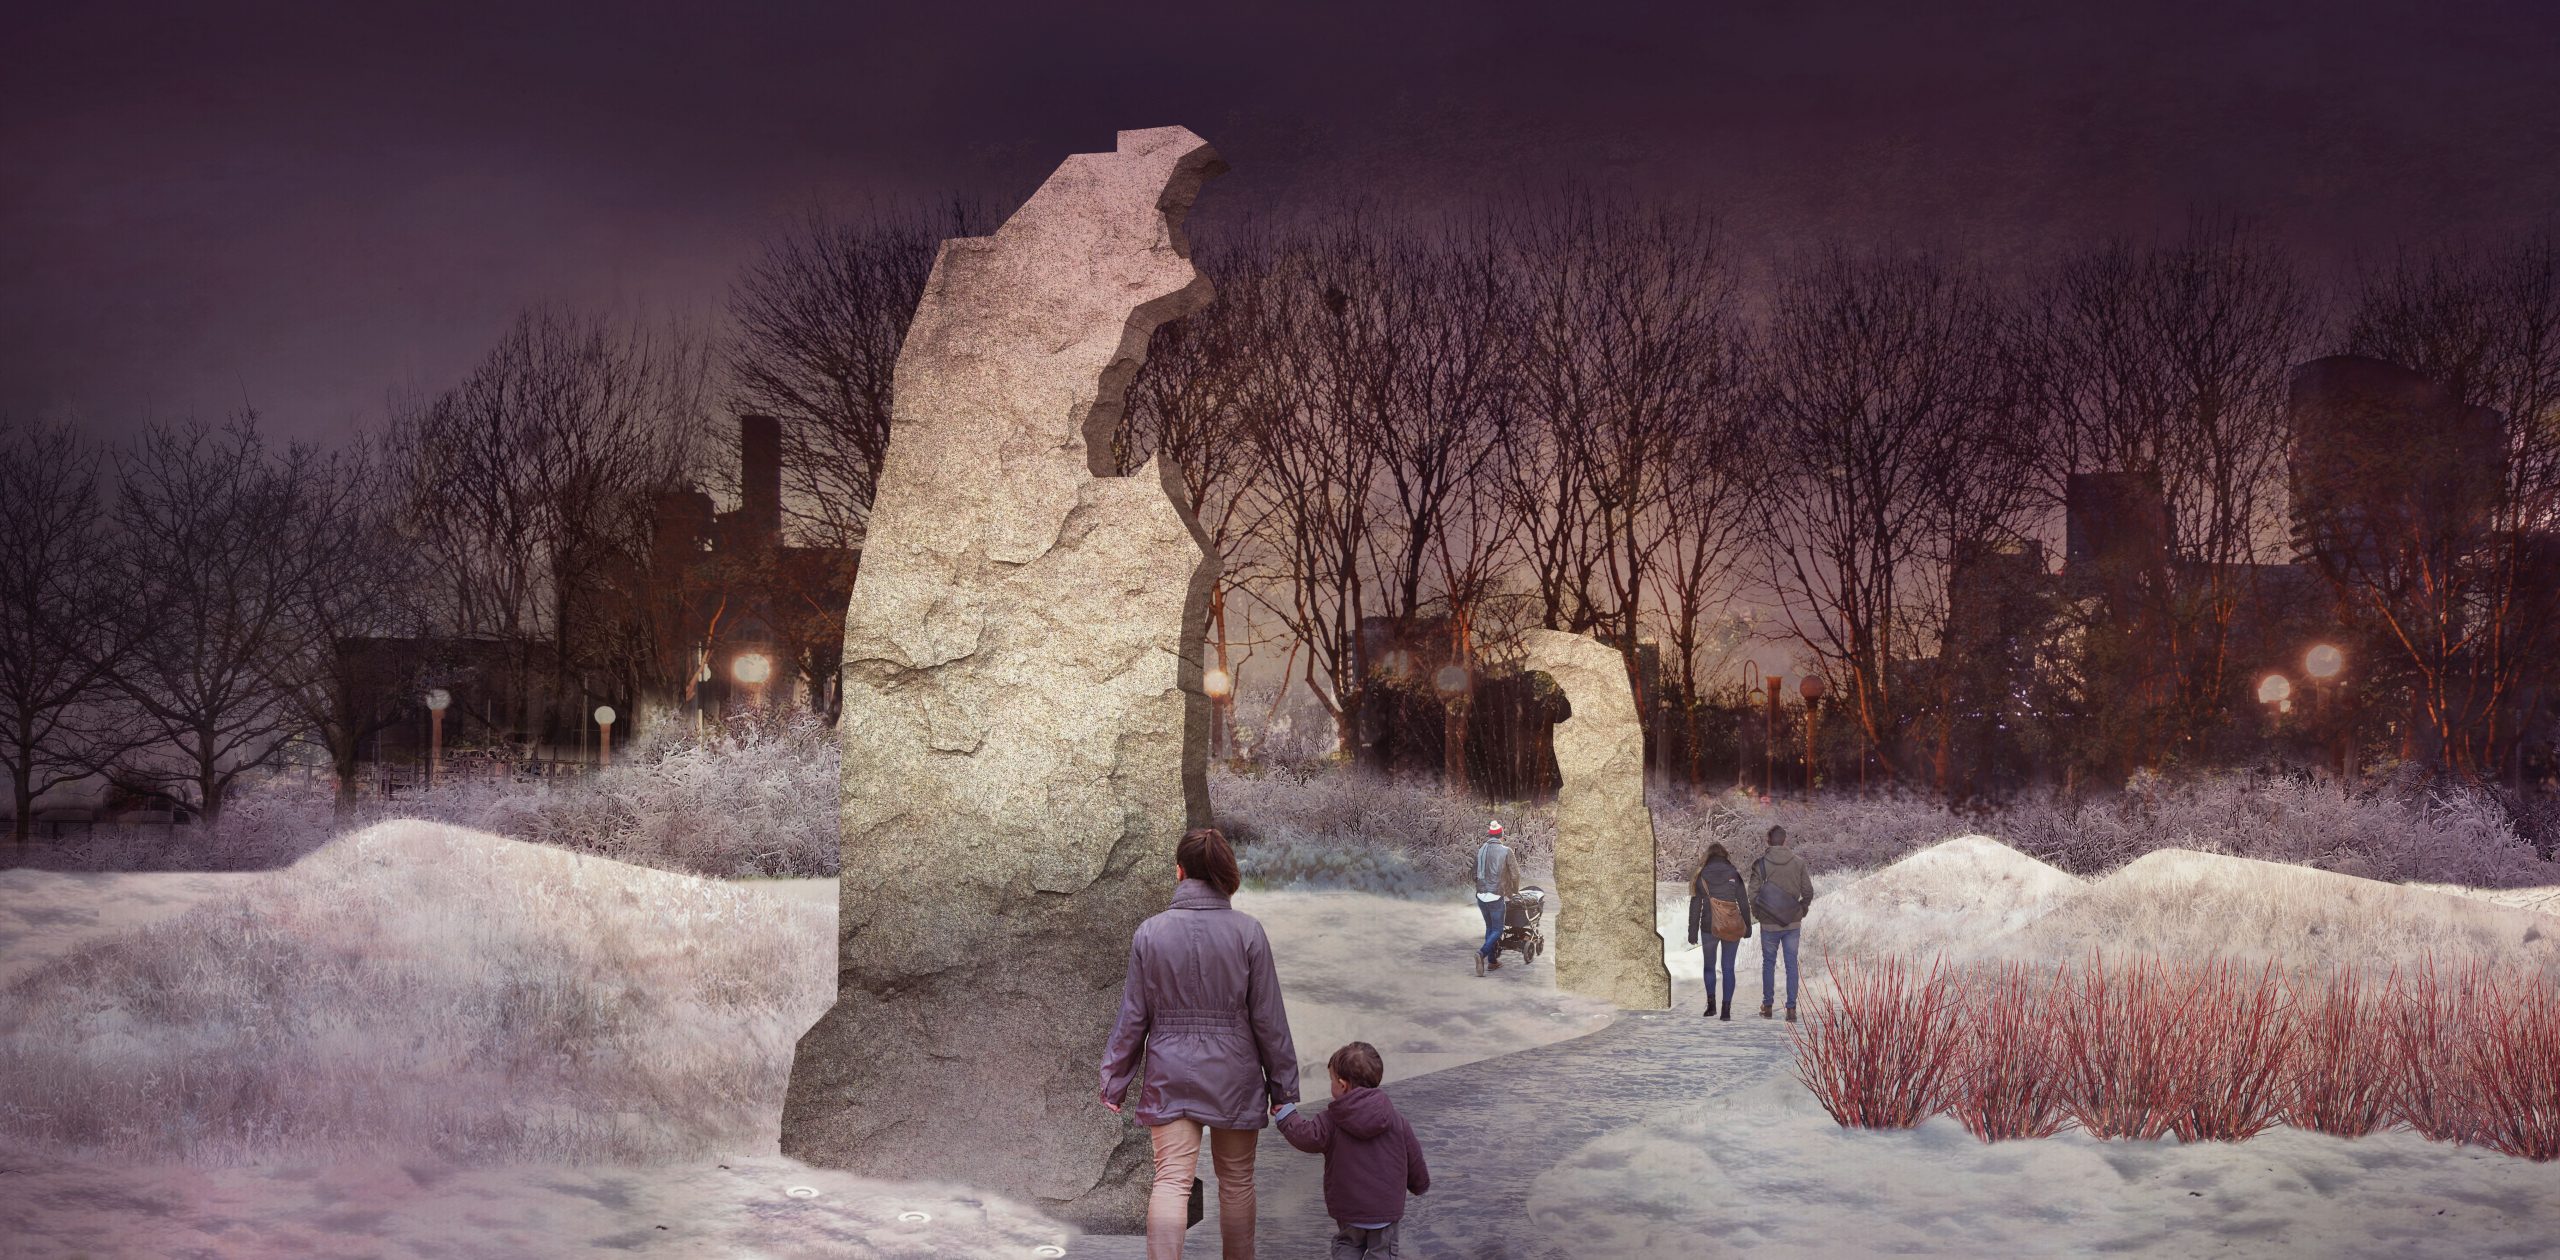 An artist rendering of the Terry Fox legacy art installation proposed for Toronto Music Garden which shows the park at night and focuses on the large sculpted granite stone slabs in irregular shapes which form an outline of Terry Fox when viewed from a certain angle in the park.